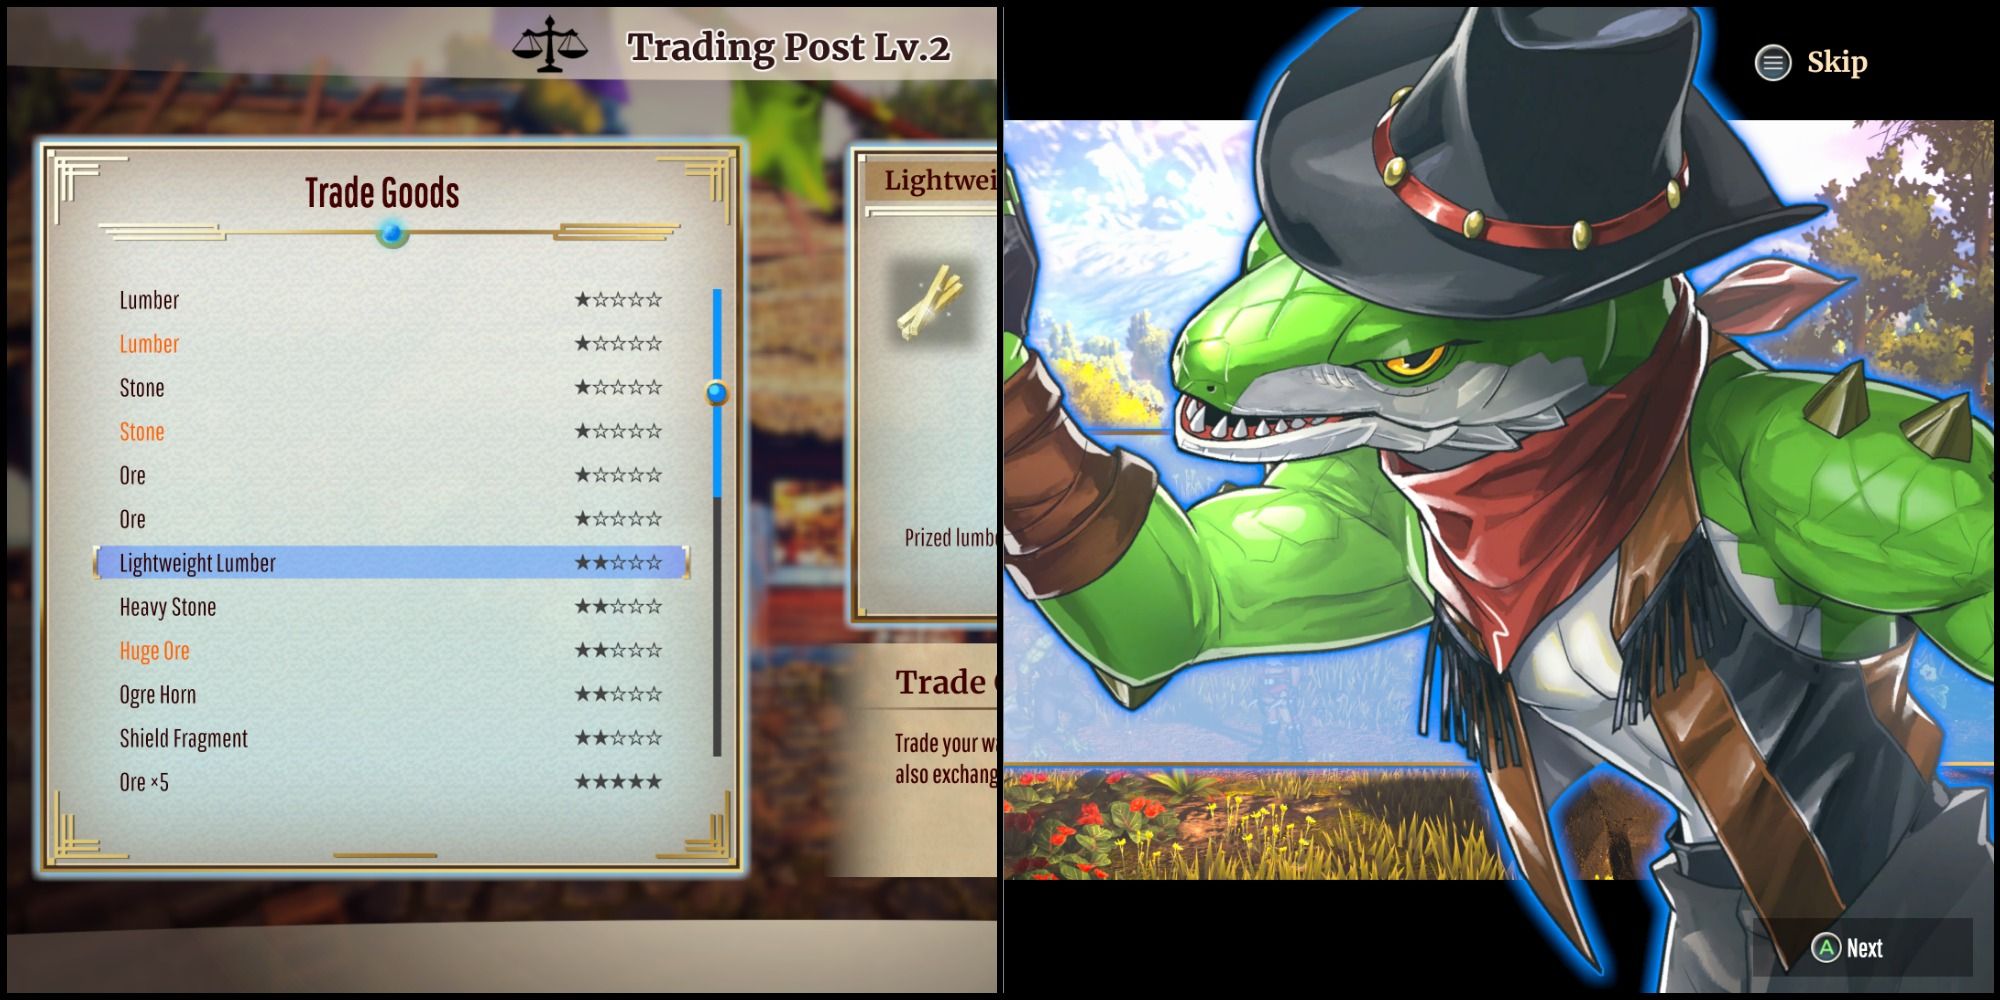 A split image of the Trading Post menu and Hogan's character screen.